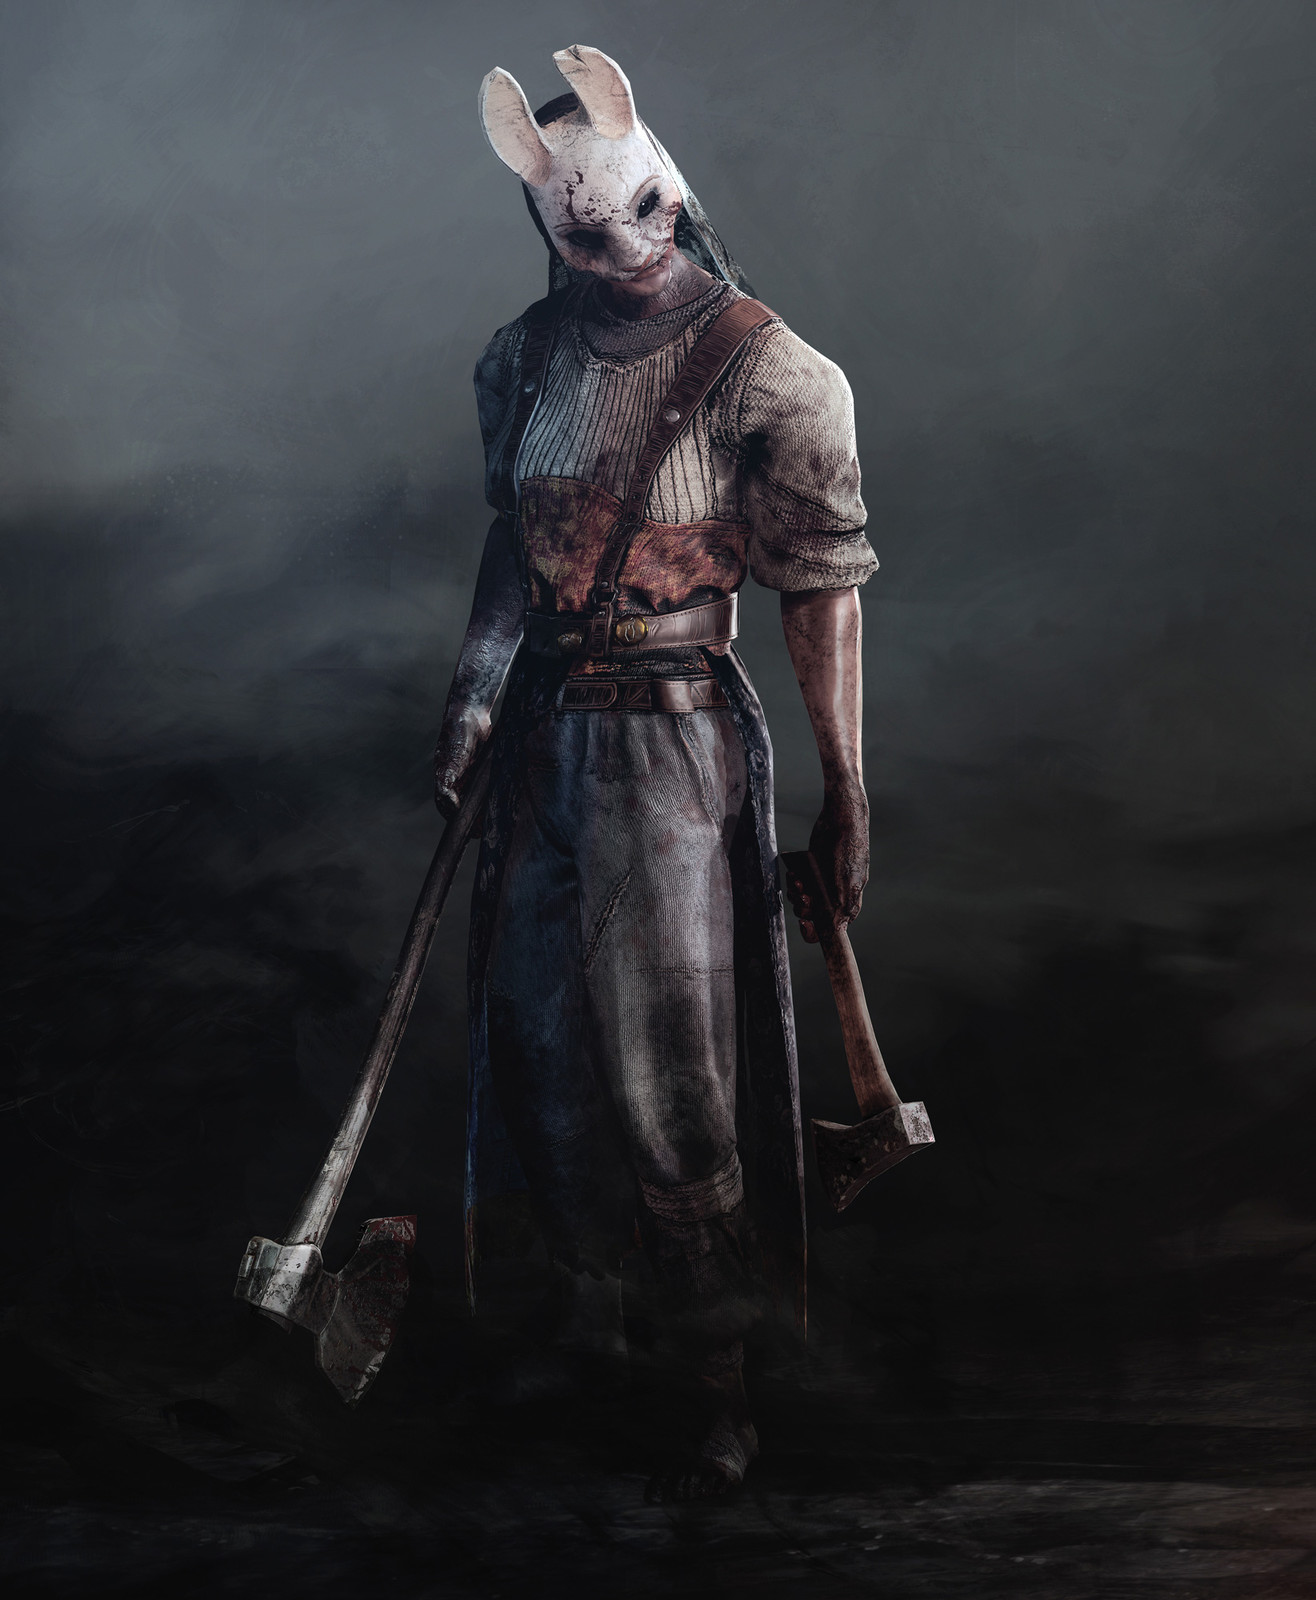 Image of the character The Huntress